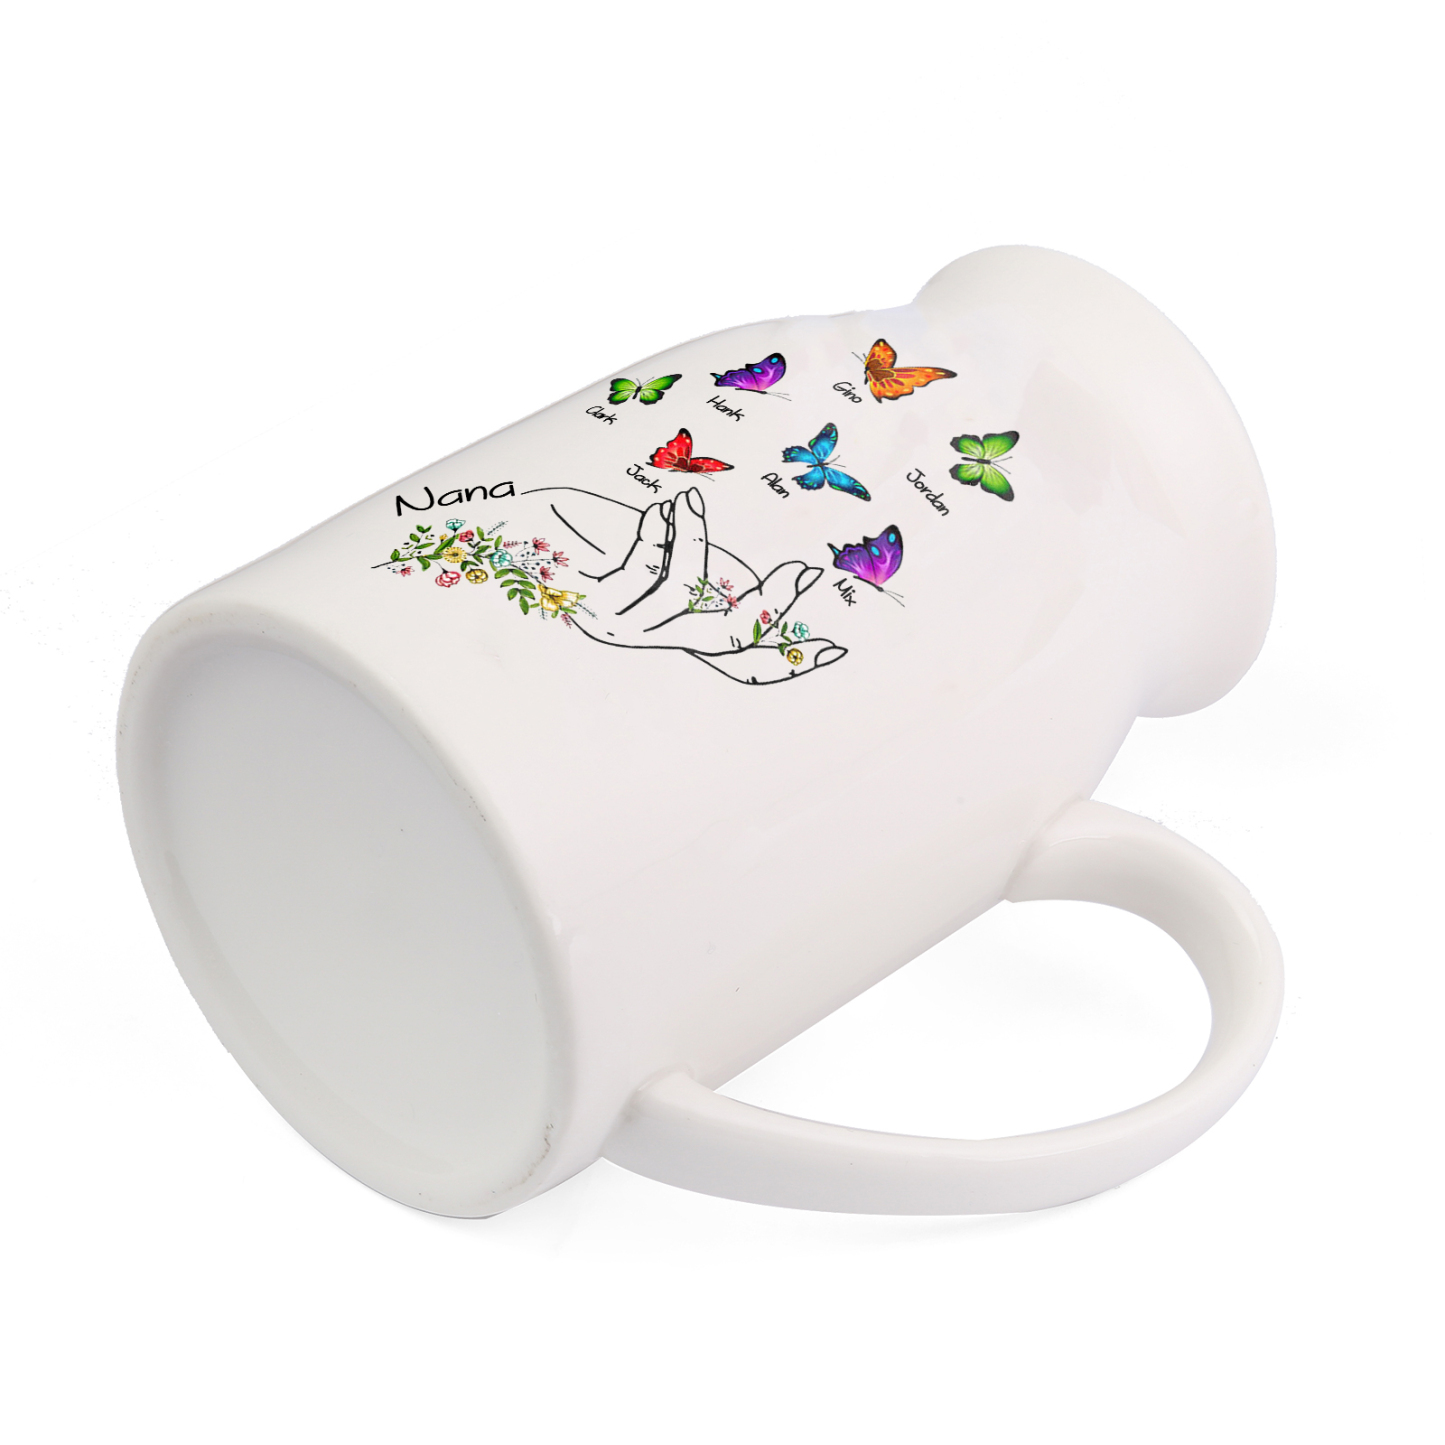 7 Names - Personalized Exquisite Flower Hand Butterfly Style Ceramic Cup With Customizable Names As a Special Gift For Nana/Mom